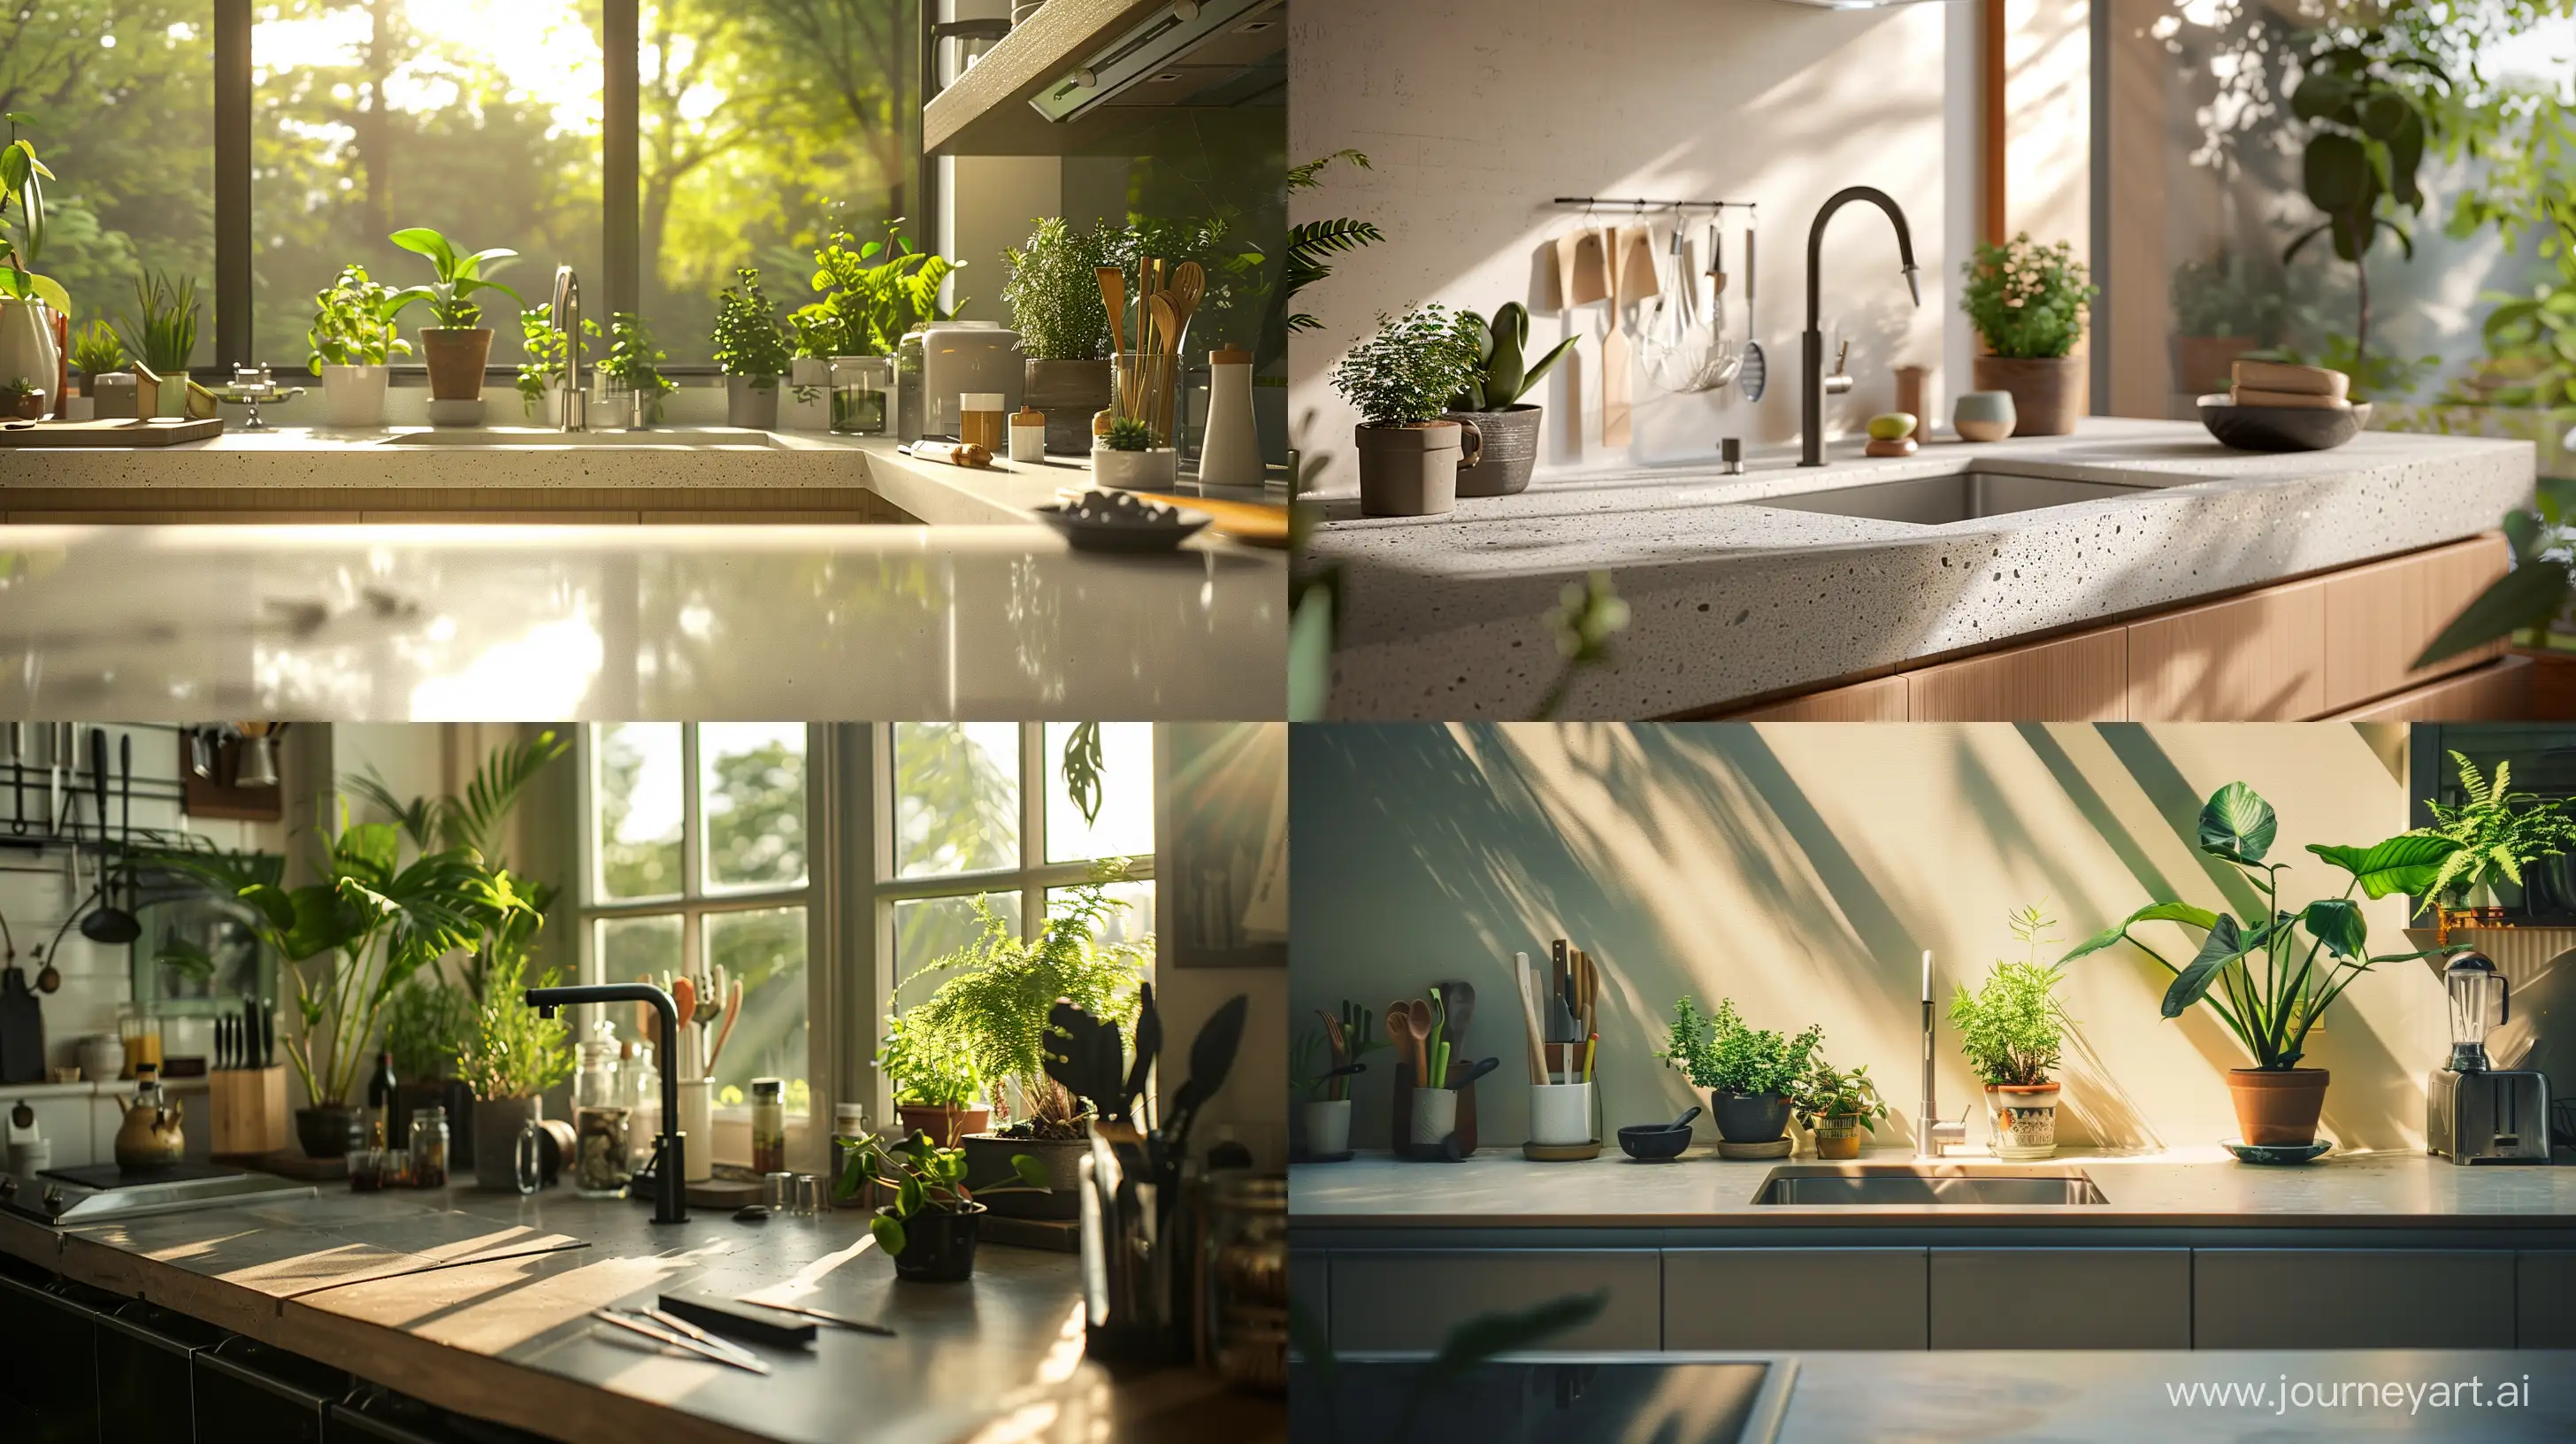 Carbon-Neutral Countertops in a modern kitchen bathed in natural light, showcasing sleek surfaces made from recycled materials, surrounded by potted plants and sustainable utensils, Photography, high-quality DSLR with a 50mm lens, capturing textures and details, --ar 16:9